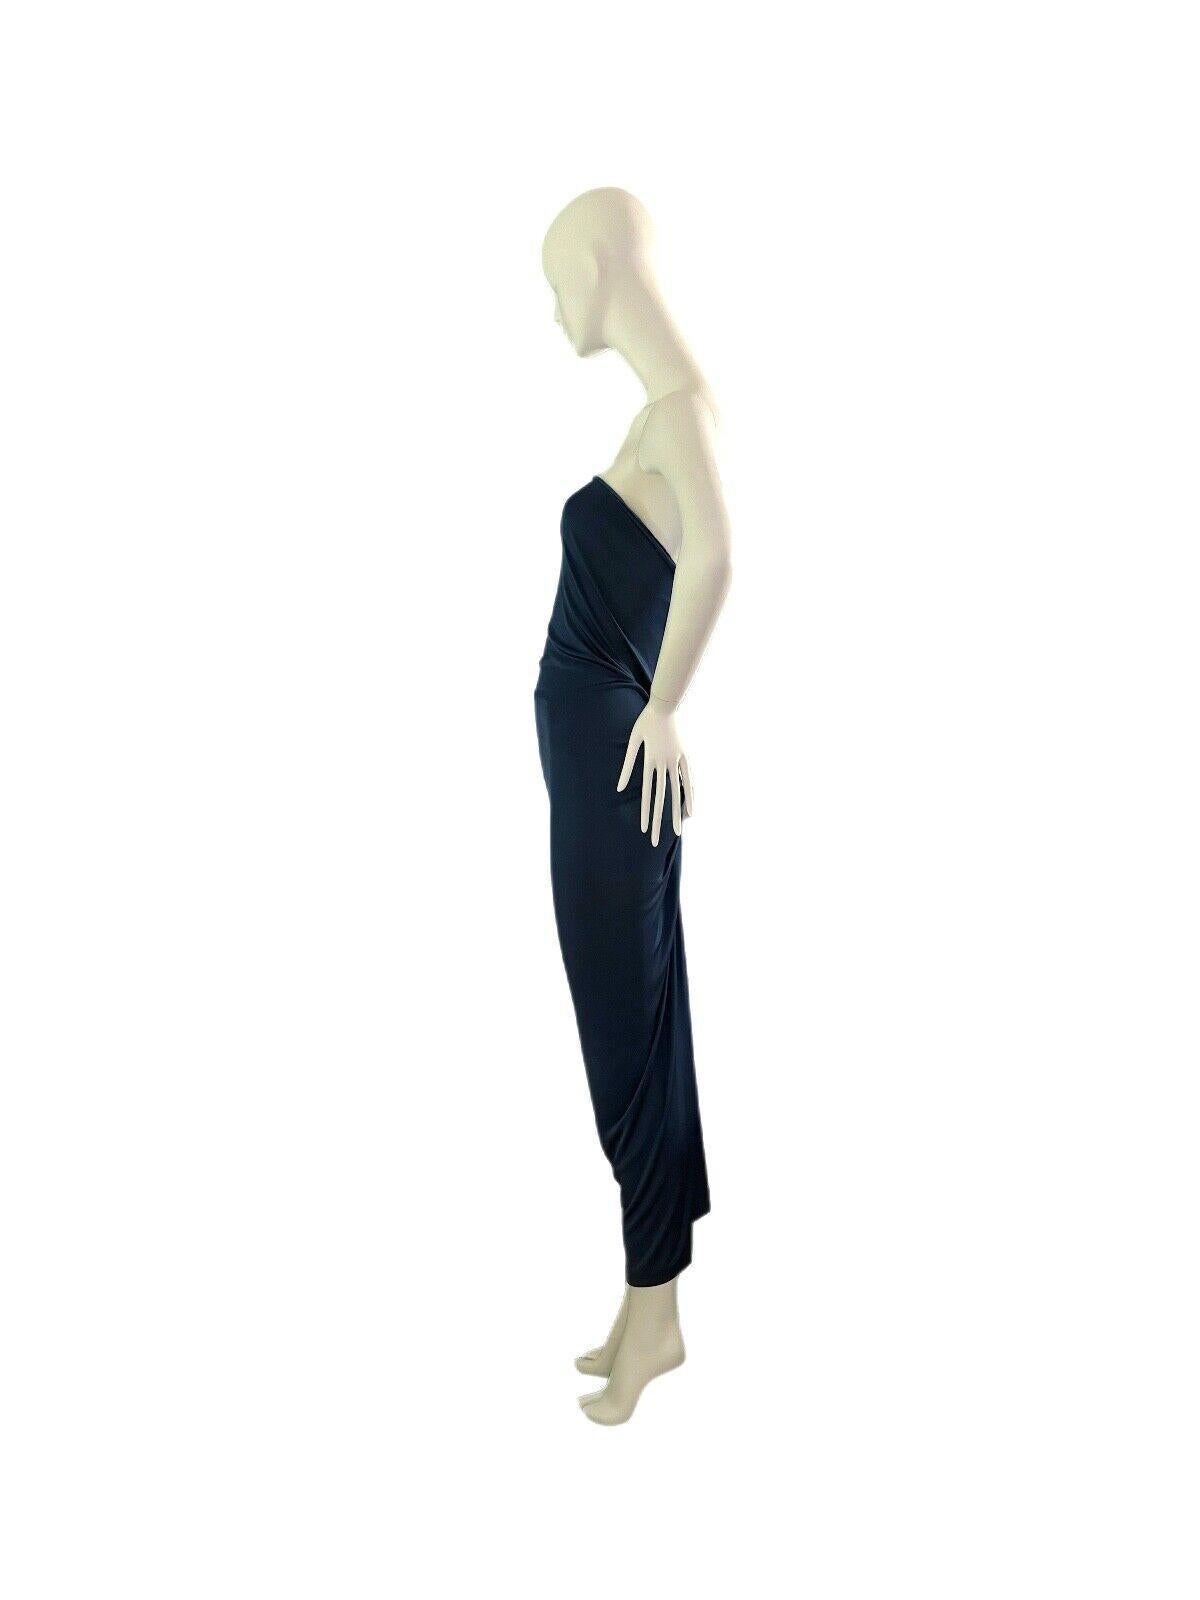 YSL by Tom Ford Rive Gauche Vintage evening gown maxi dress In New Condition For Sale In Leonardo, NJ